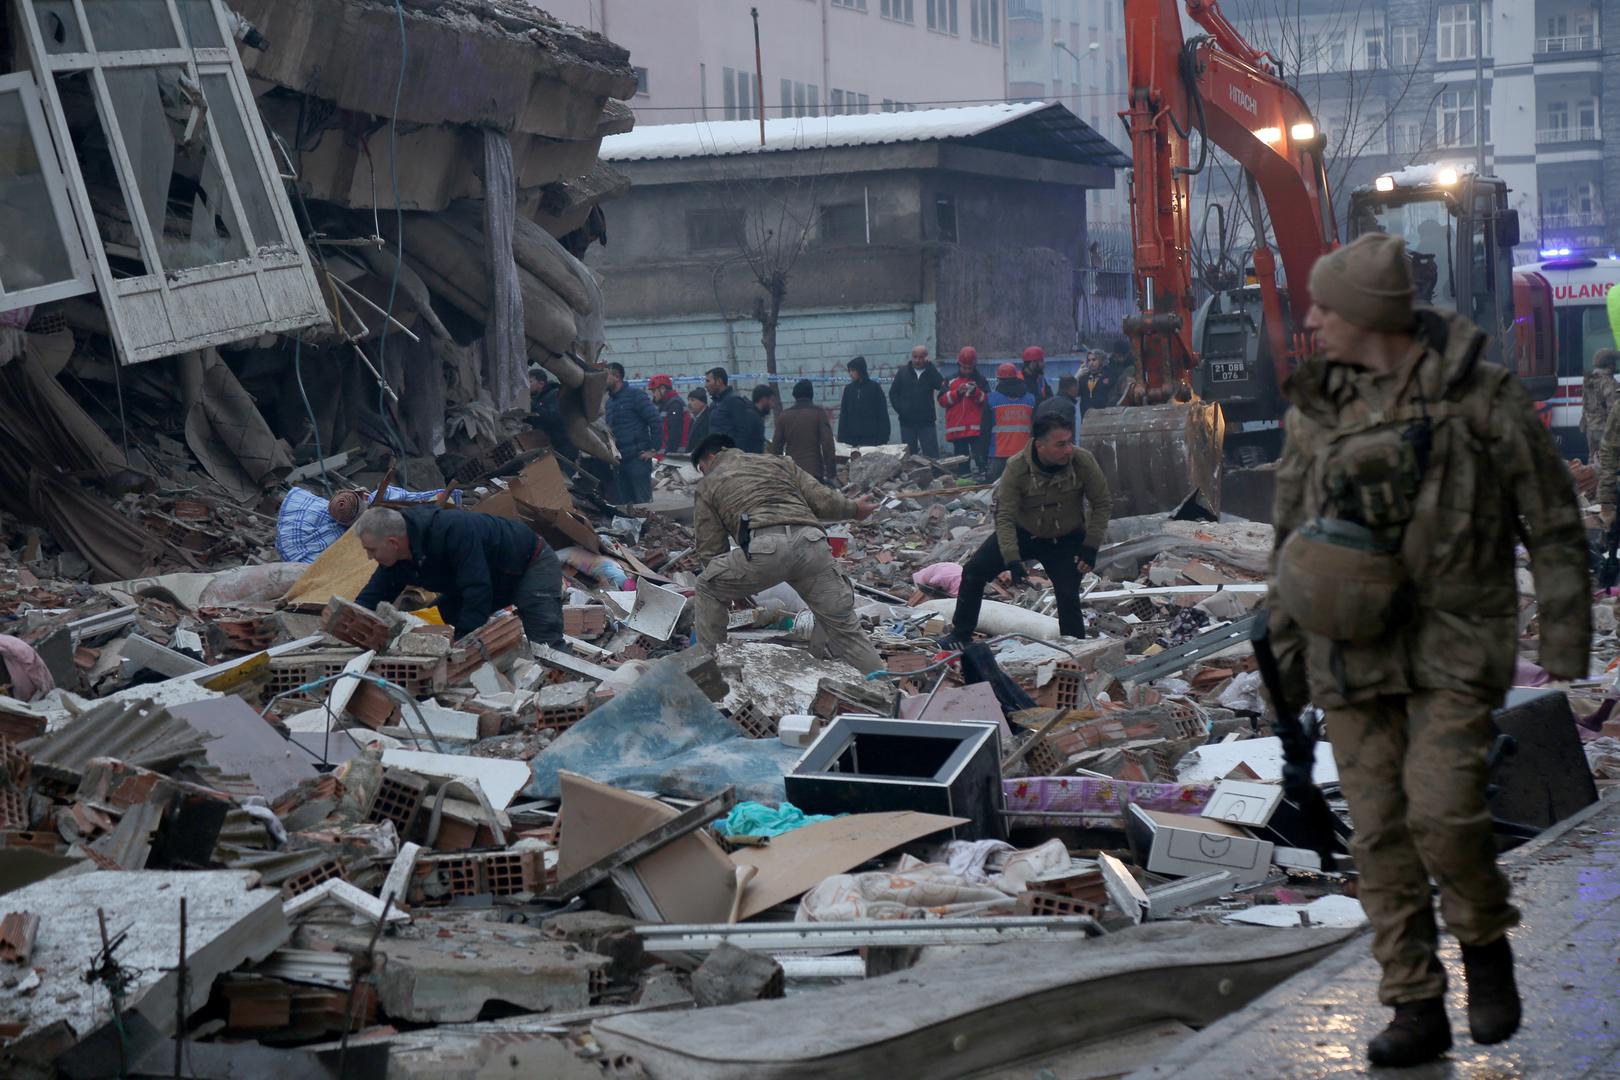 People search for survivors under the rubble following an earthquake in Diyarbakir, Turkey February 6, 2023. REUTERS/Sertac Kayar Photo: SERTAC KAYAR/REUTERS